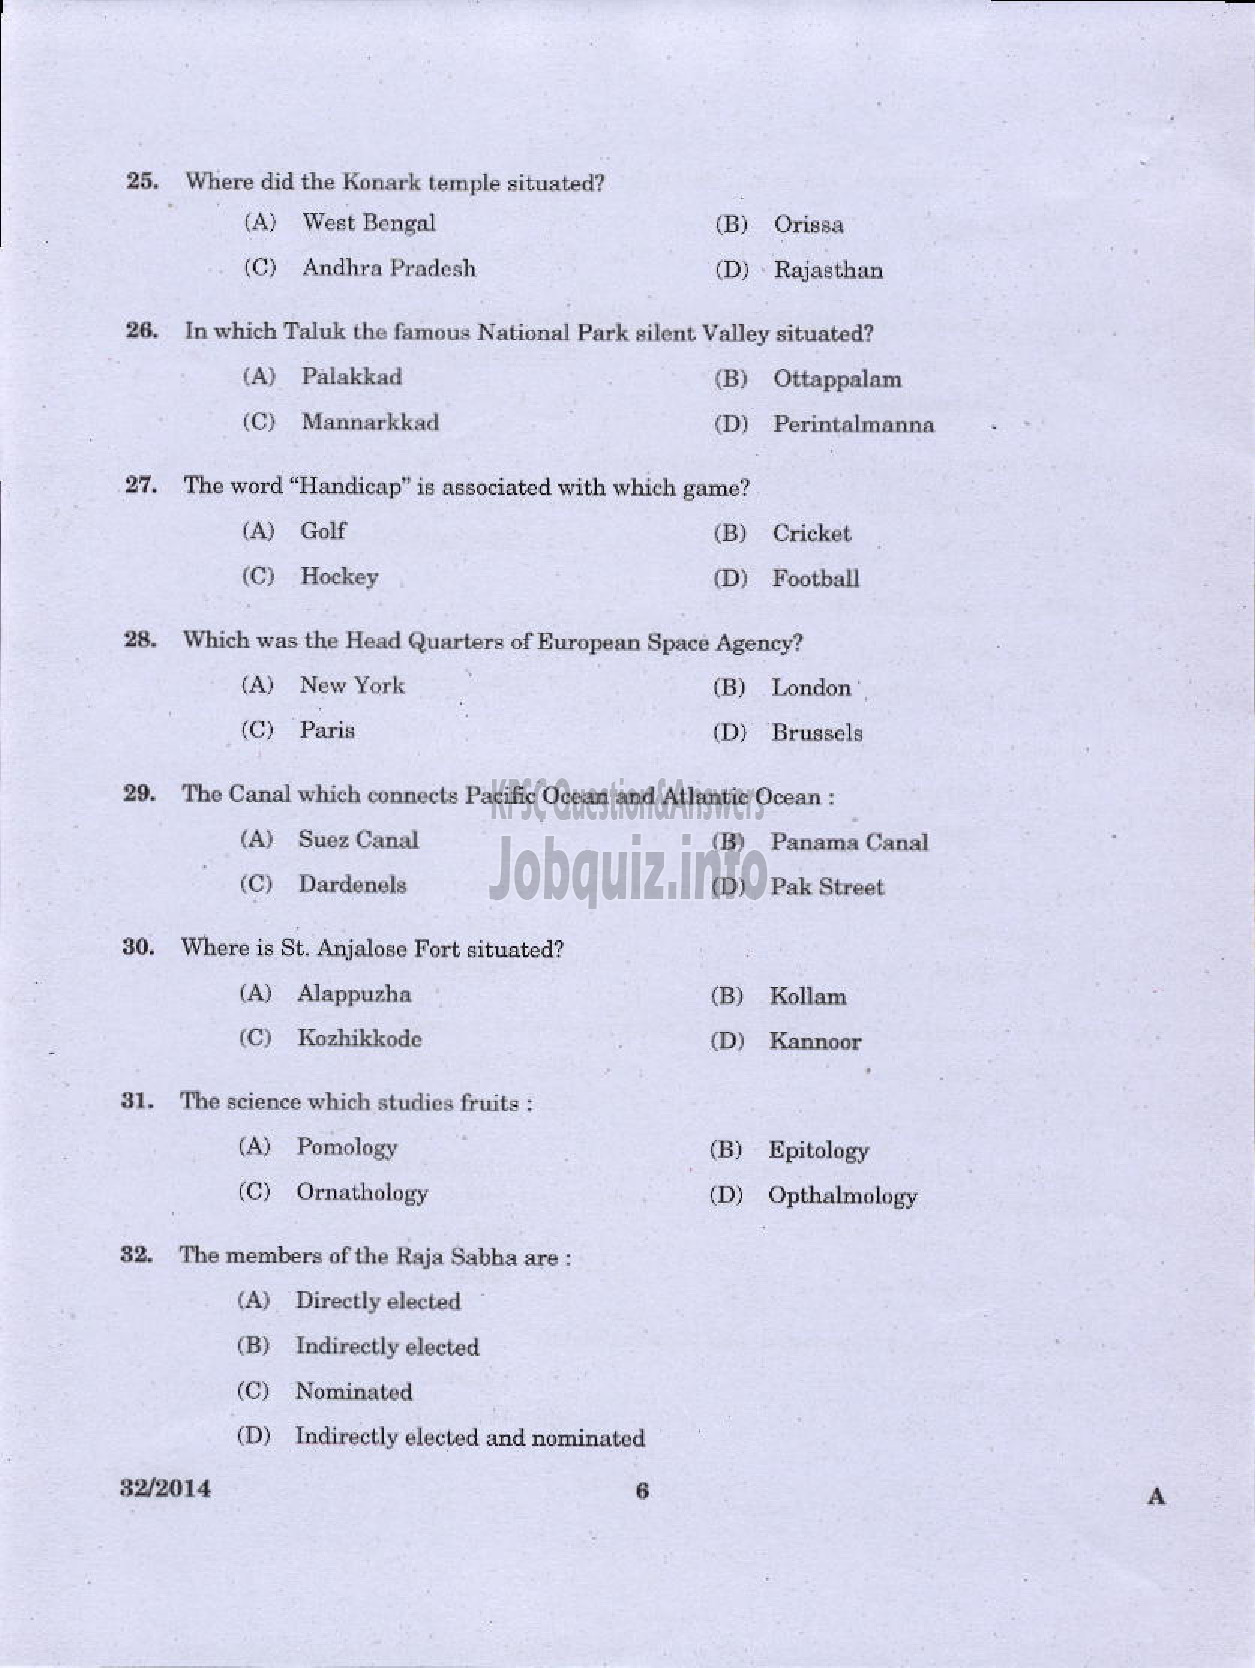 Kerala PSC Question Paper - LOWER DIVISION TYPIST NCA VARIOUS GOVERNMENT OWNED COMPANIES IDKY-4